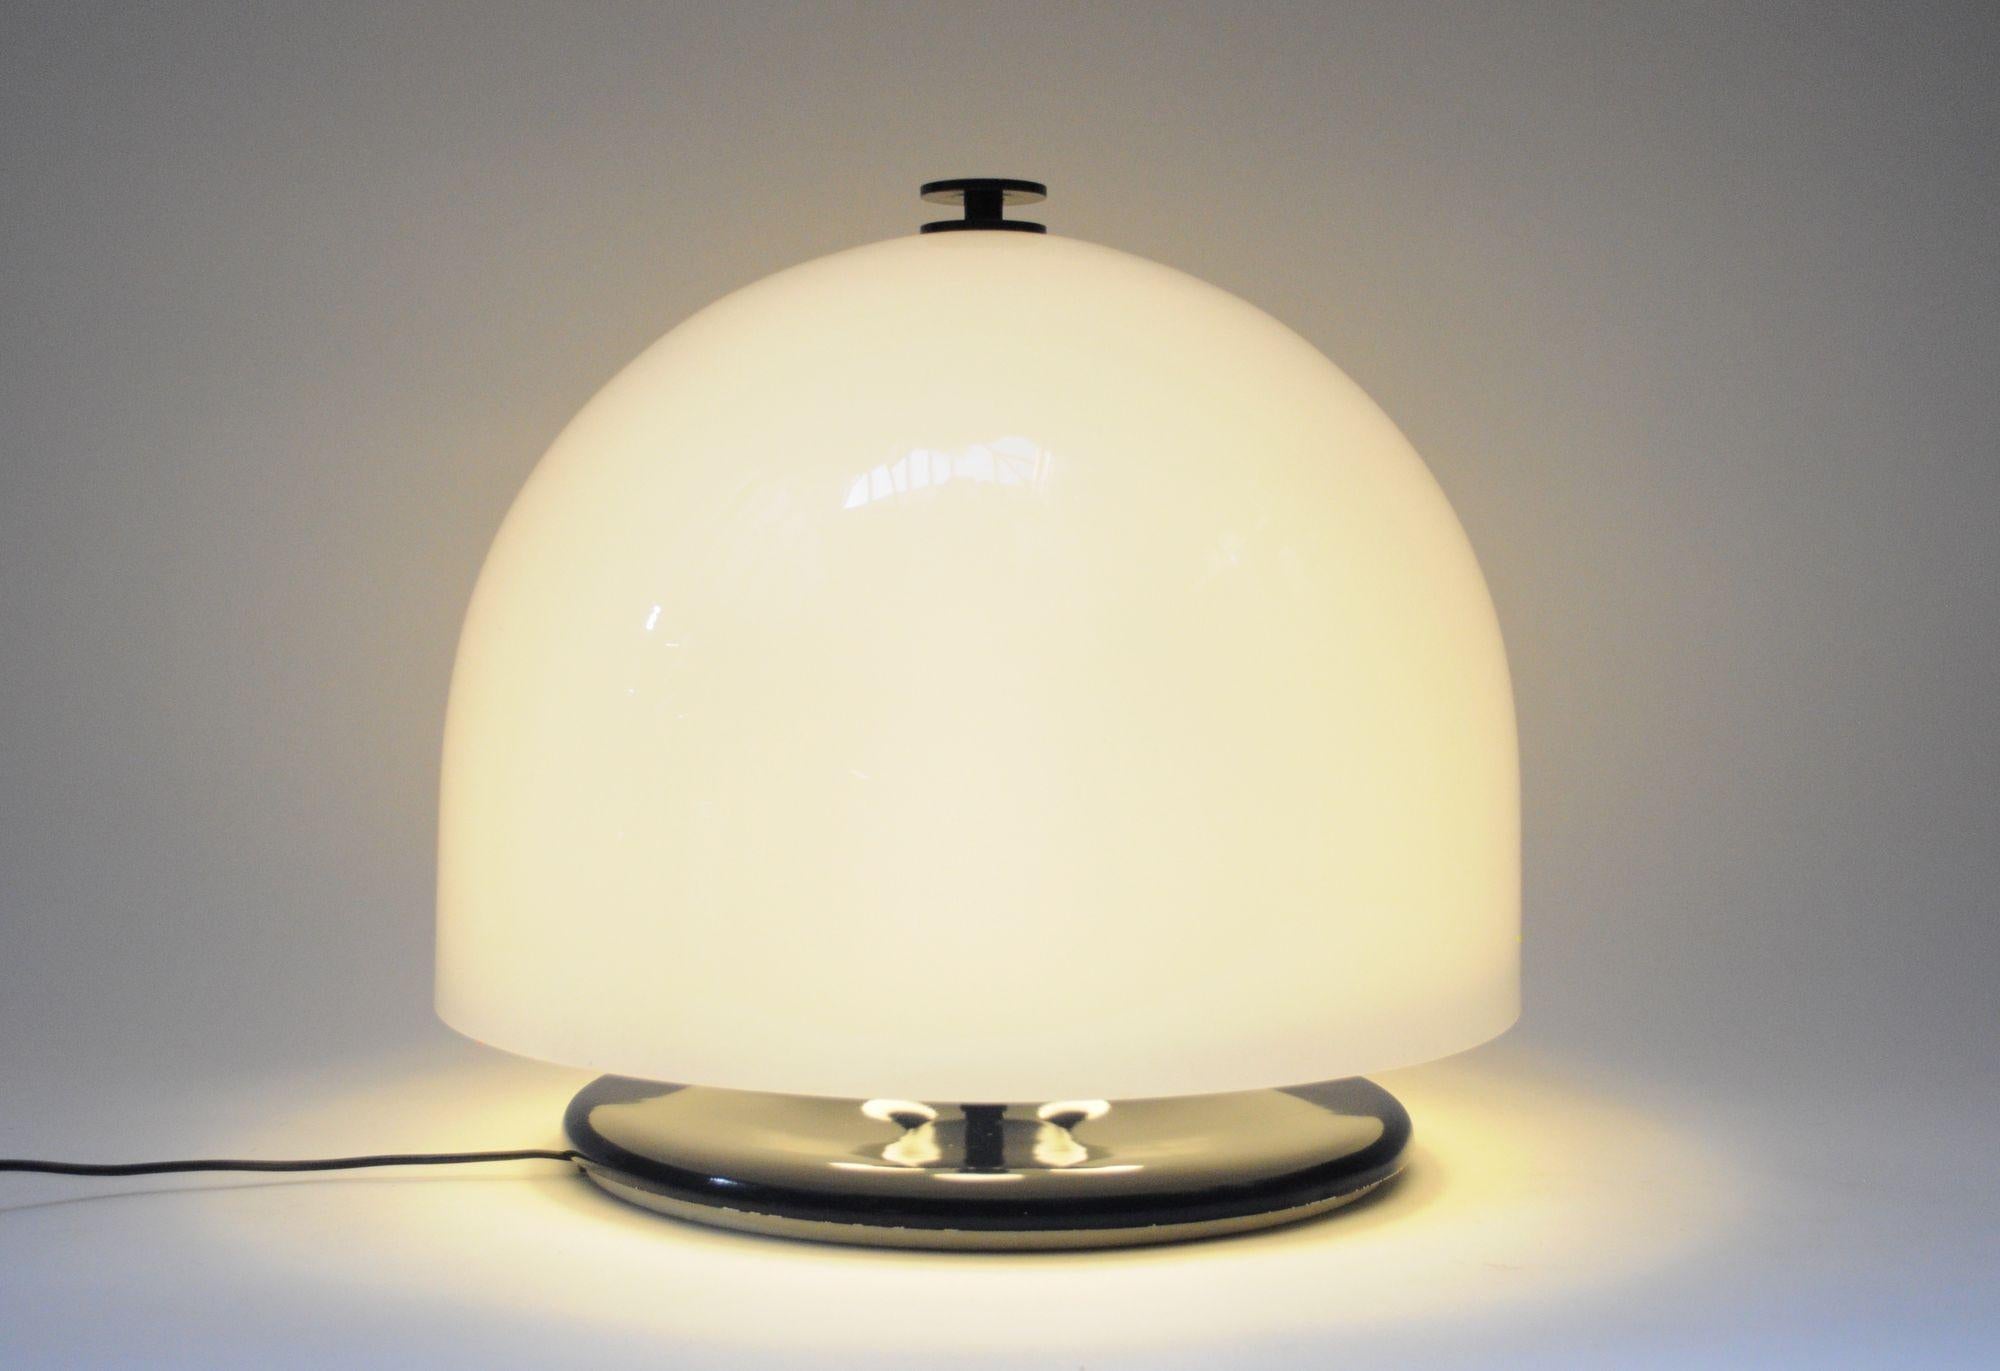 Vintage Italian Space Age Dome Mushroom Table Lamp in Enameled Metal and Acrylic In Good Condition For Sale In Brooklyn, NY